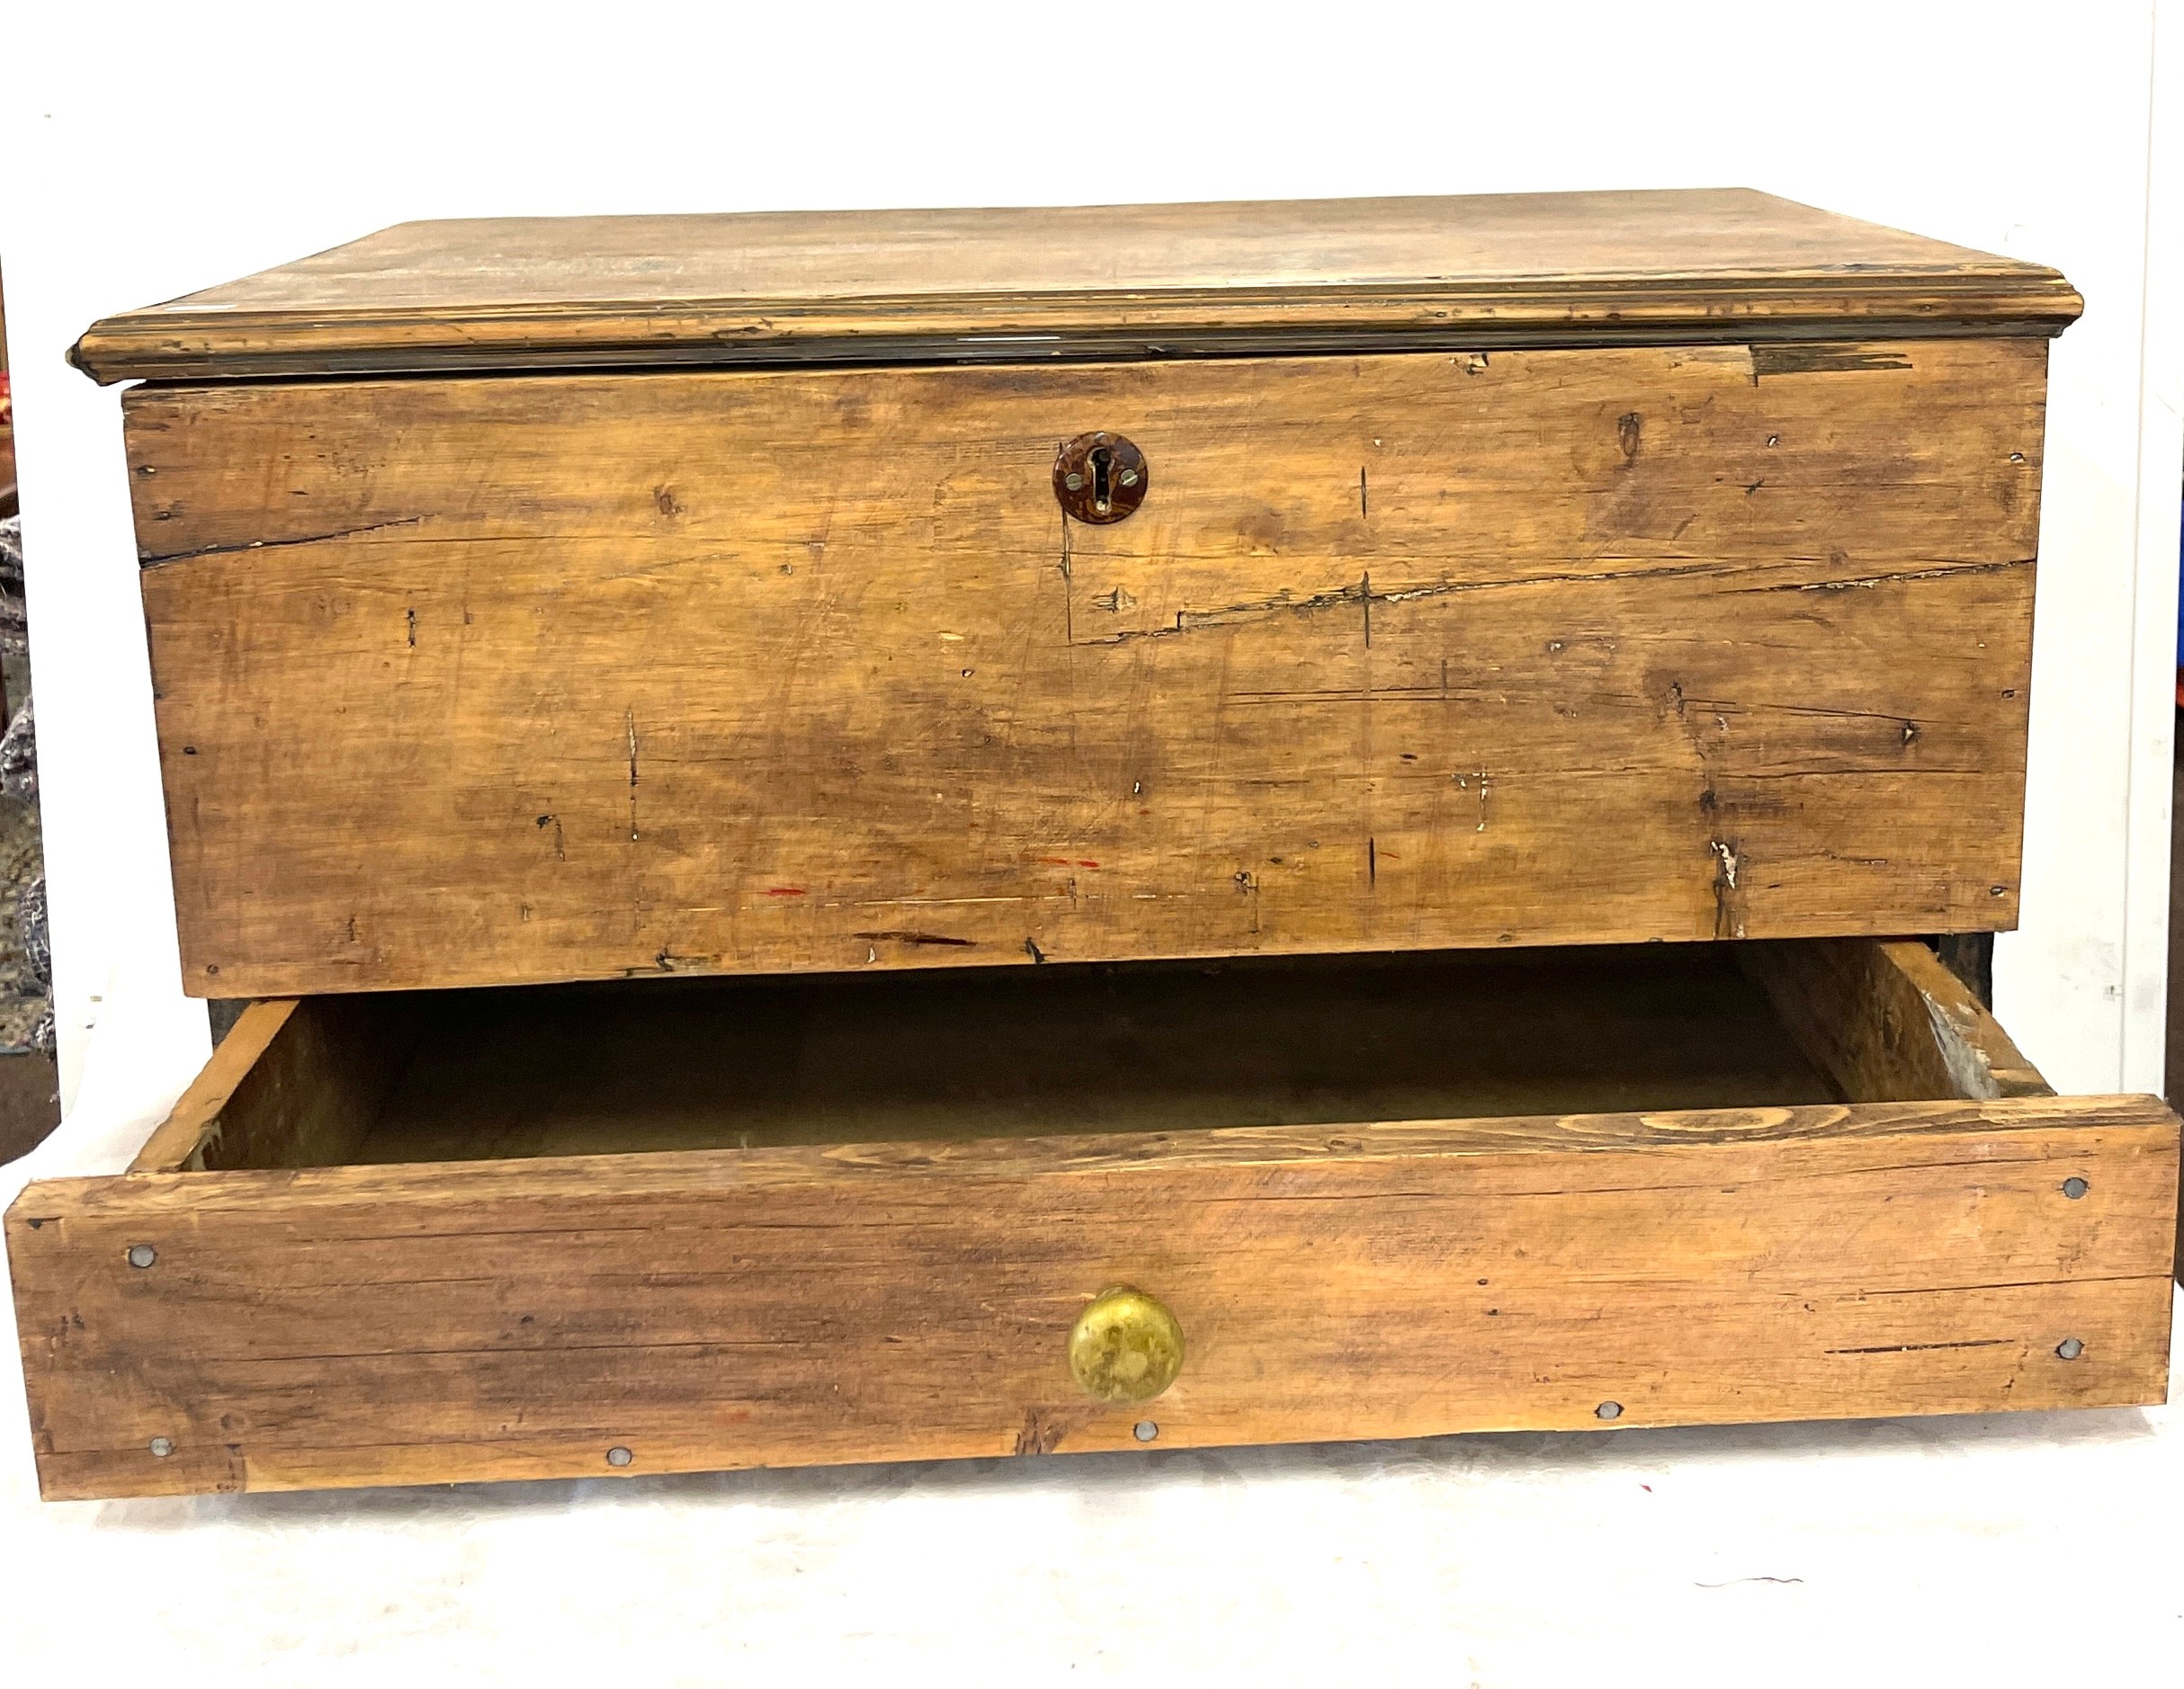 Pine mule chest, approximate measurements: 13 x 24 x 16 inches - Image 2 of 5